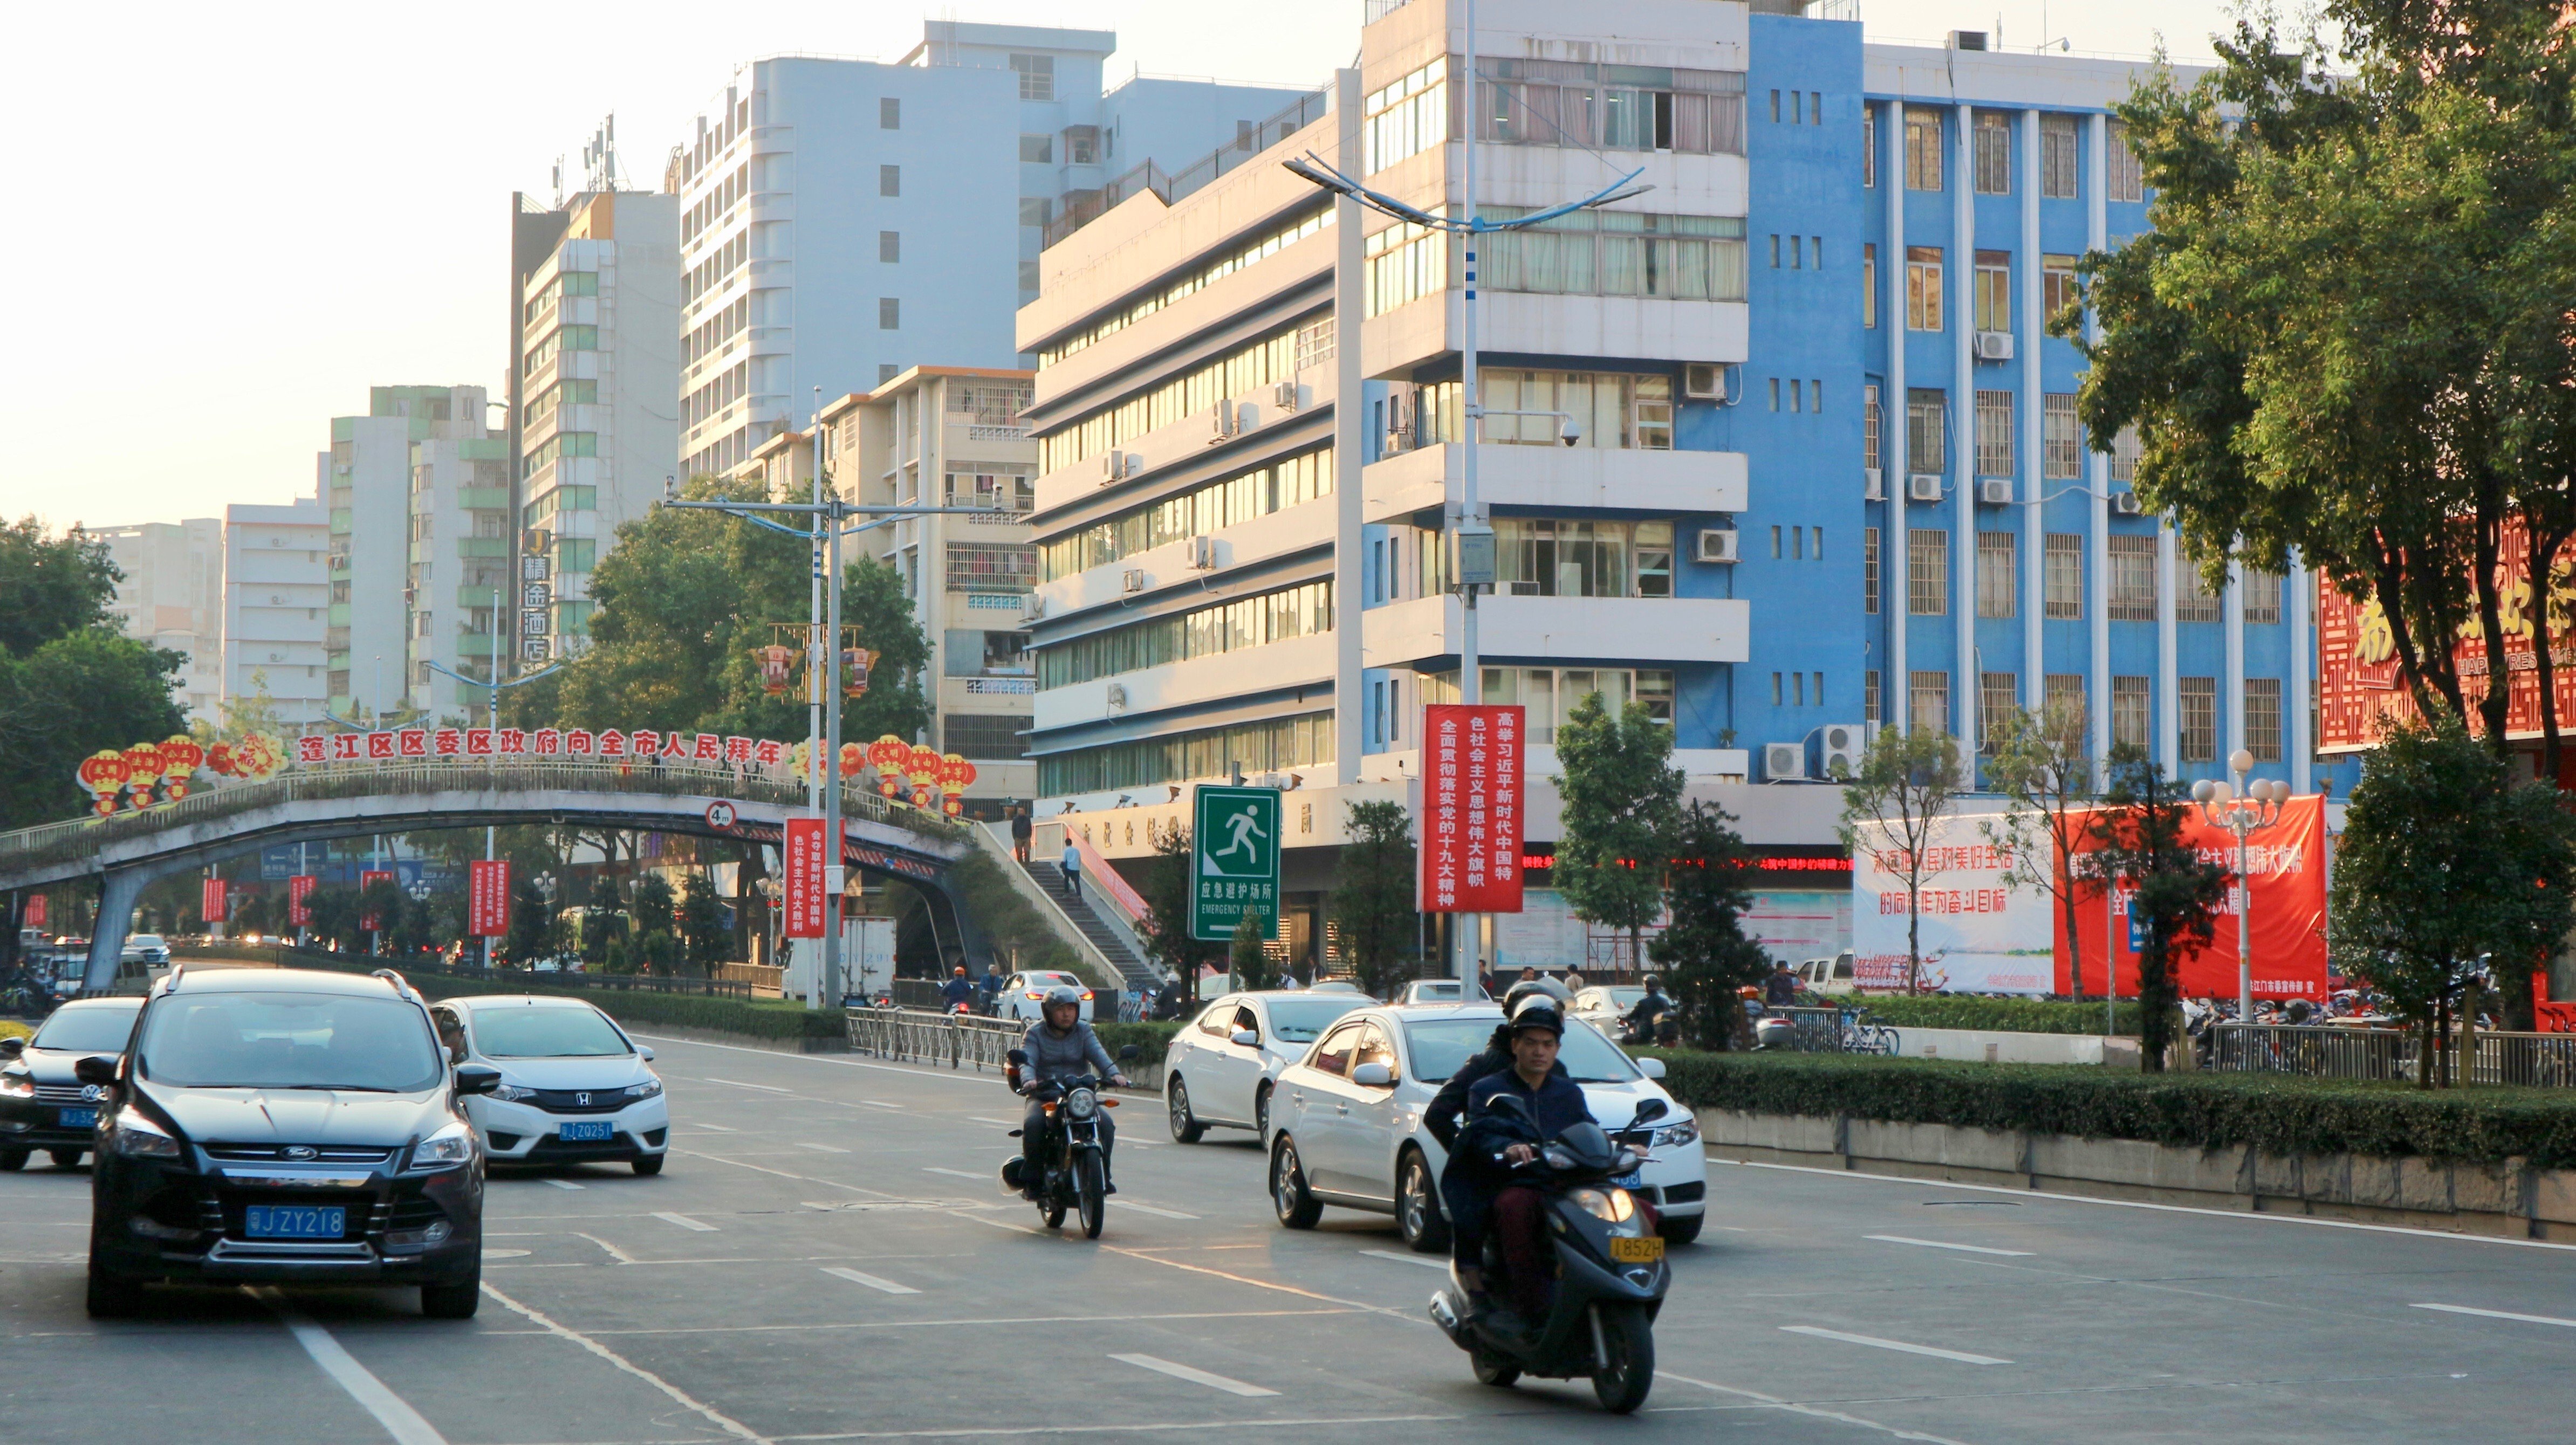 A scene in Pengjiang district, Jiangmen city, part of the Greater Bay Area plan in China. Photo: Shutterstock Images